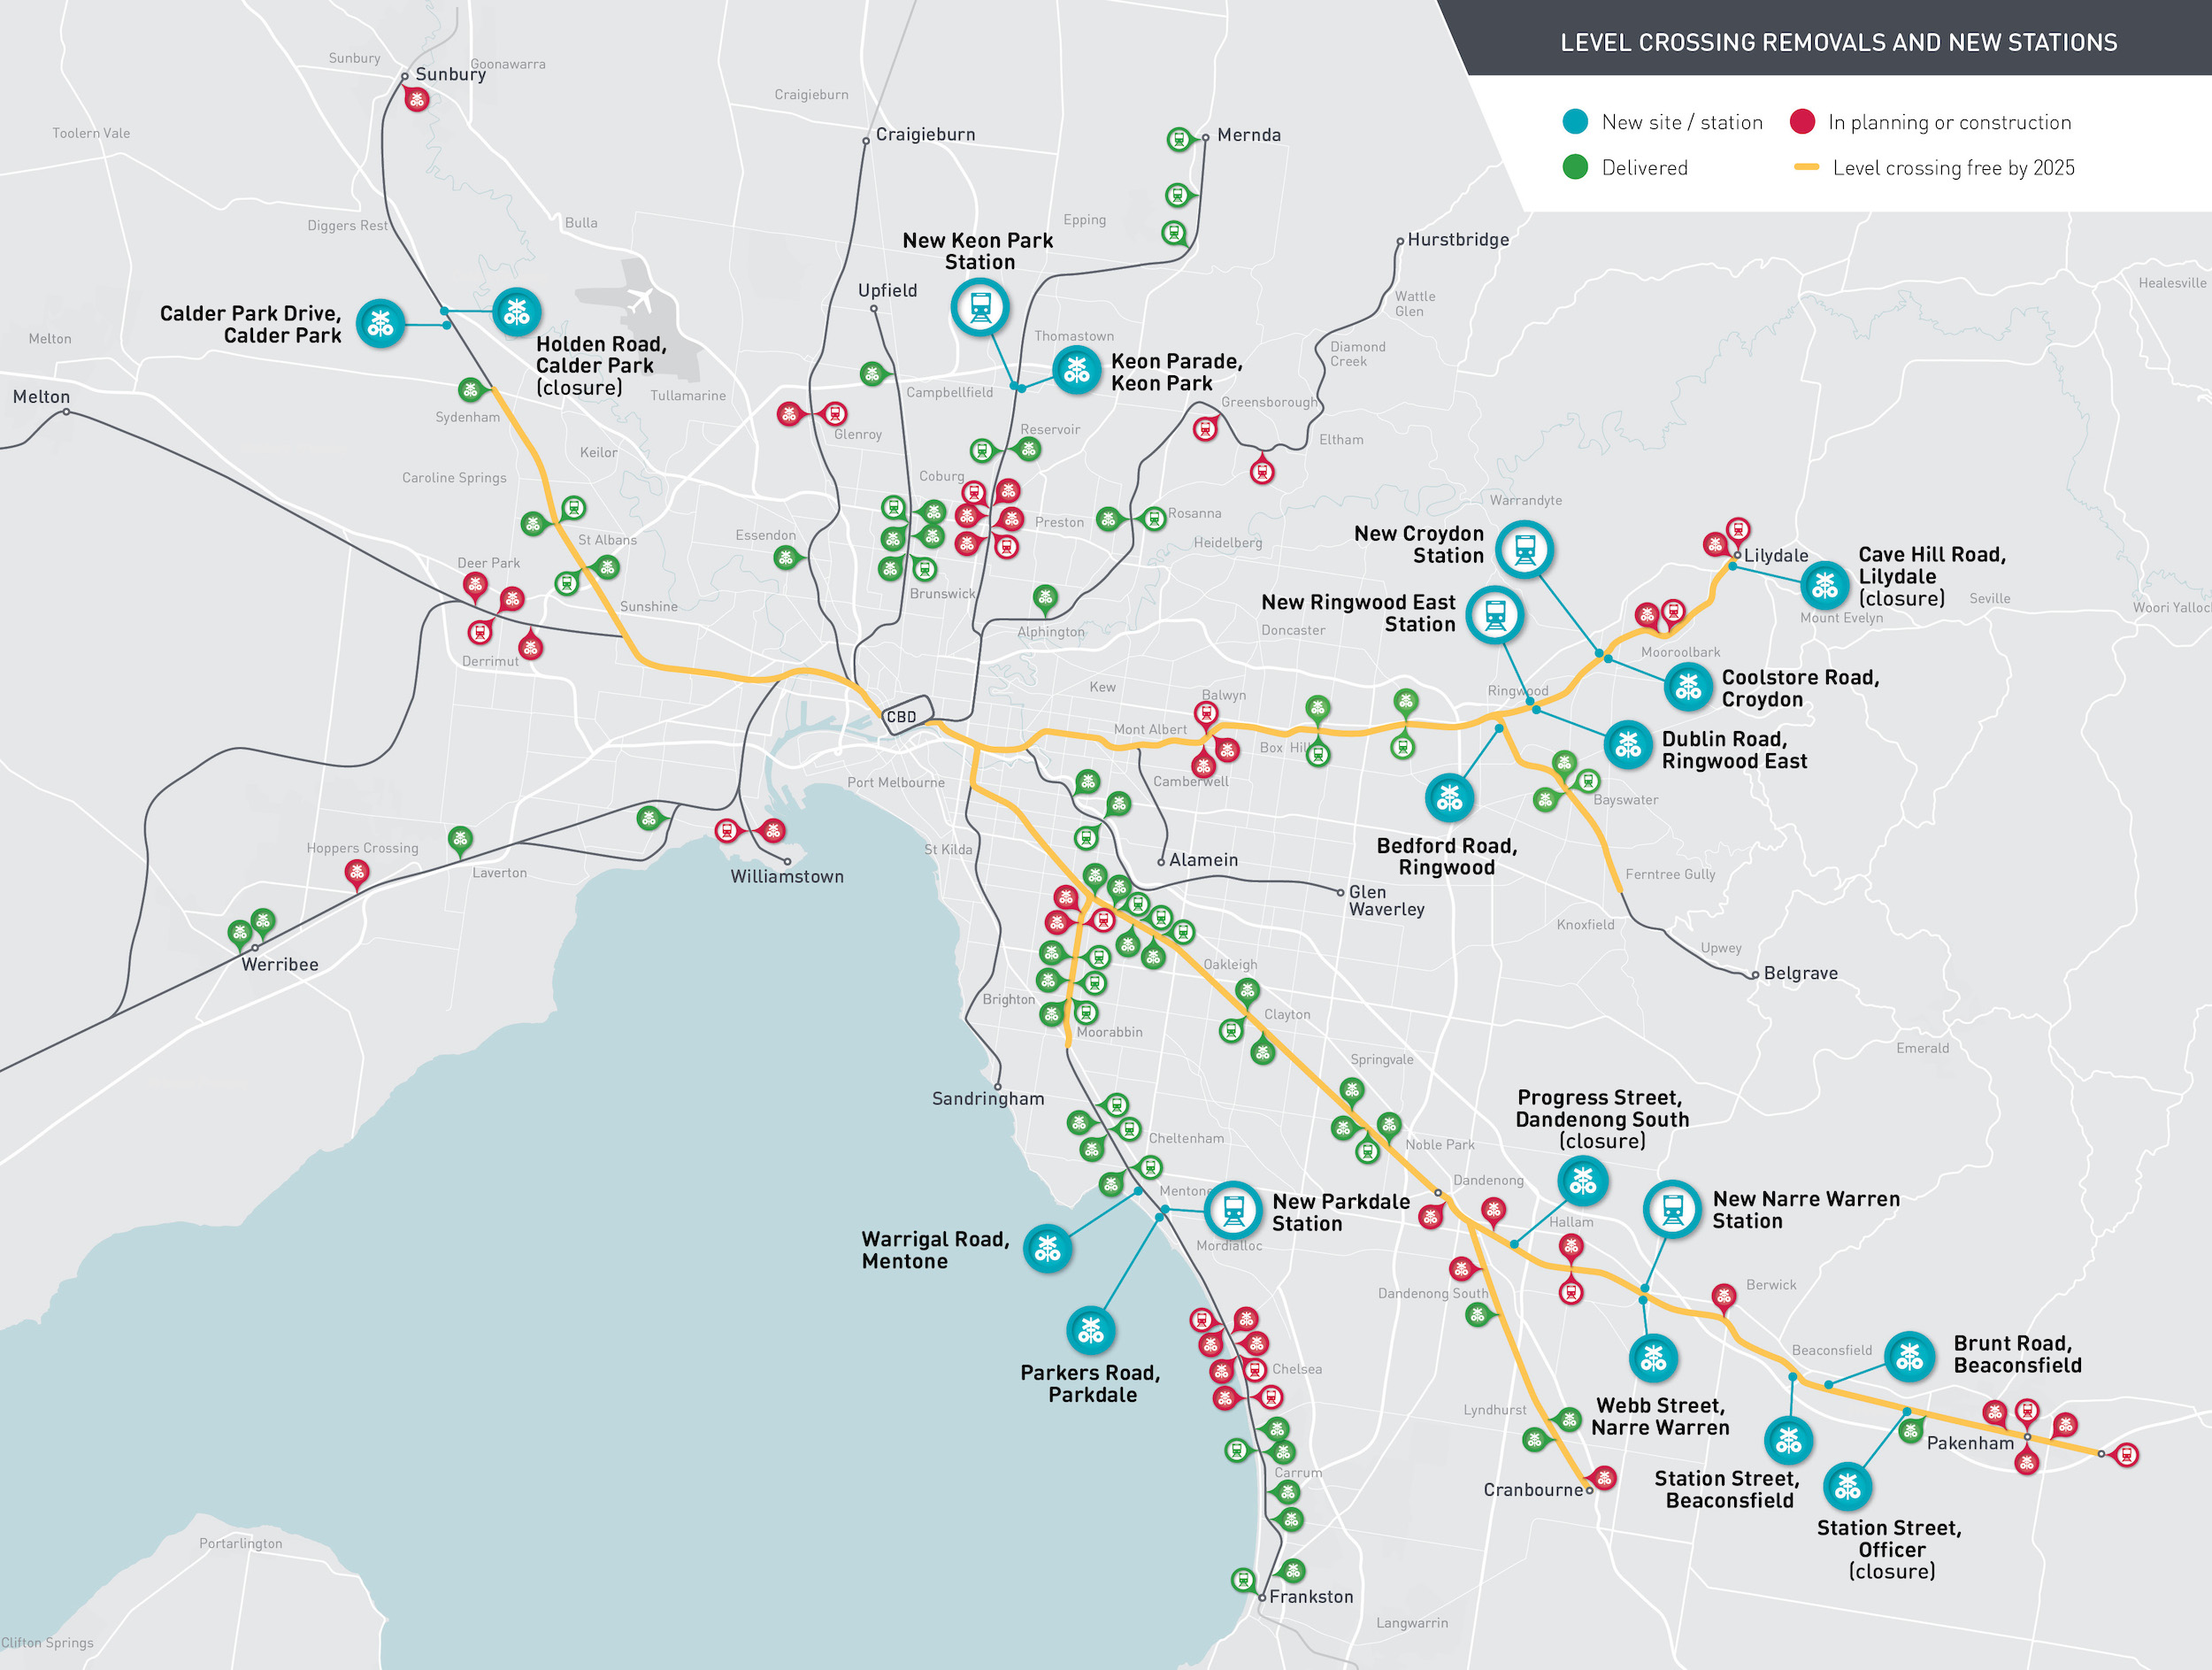 Map locations of all level crossing removals